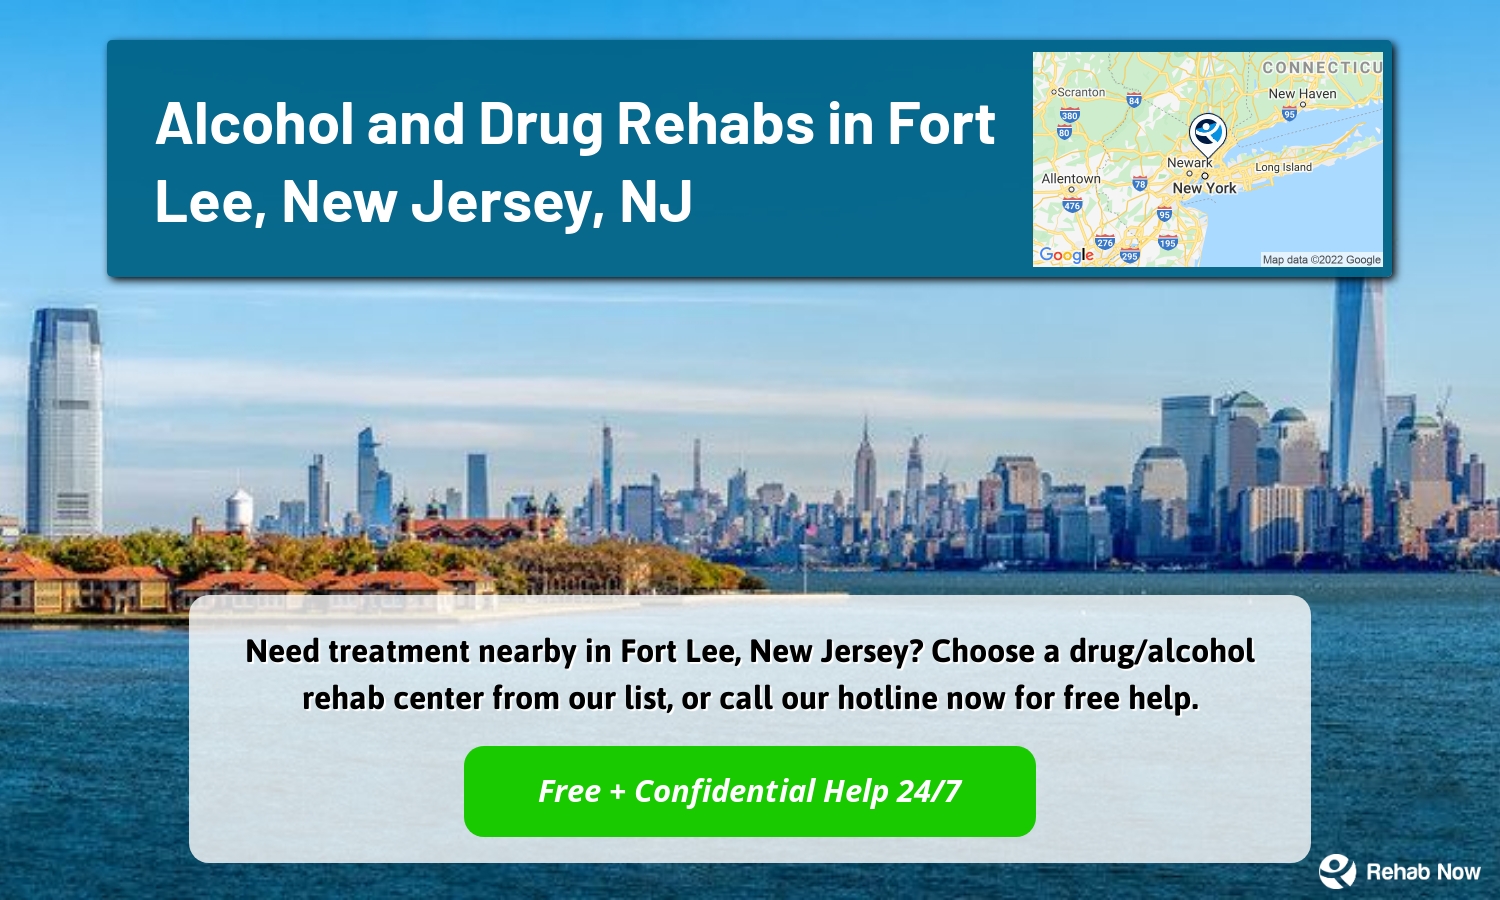 Need treatment nearby in Fort Lee, New Jersey? Choose a drug/alcohol rehab center from our list, or call our hotline now for free help.